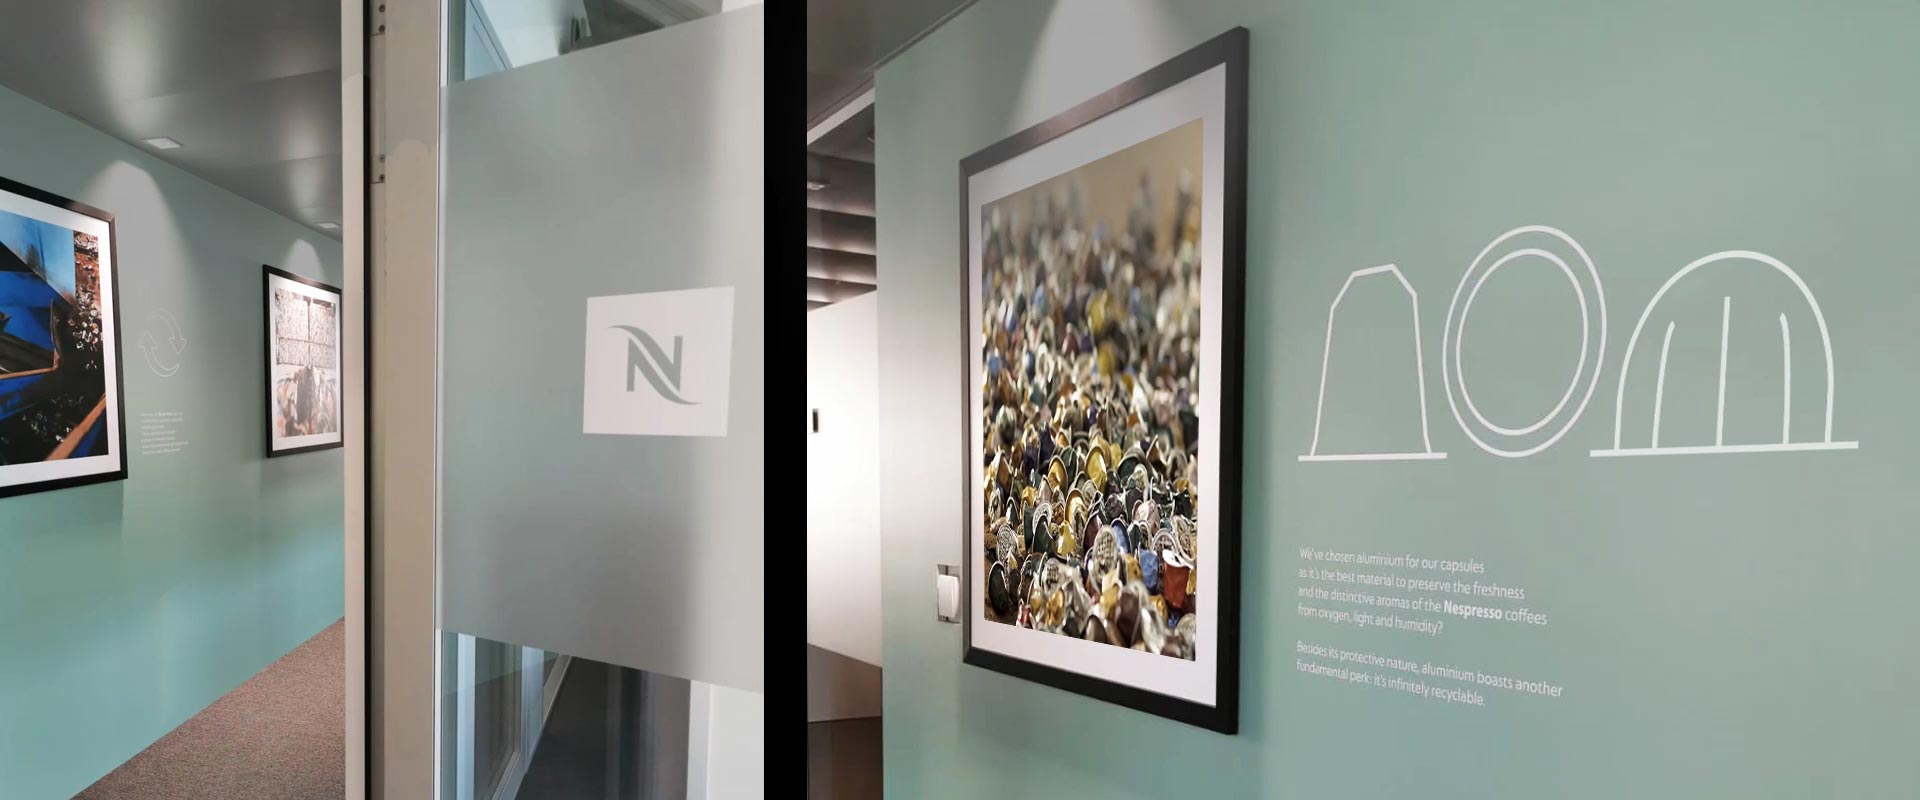 Images and graphic elements of new Nespresso offices